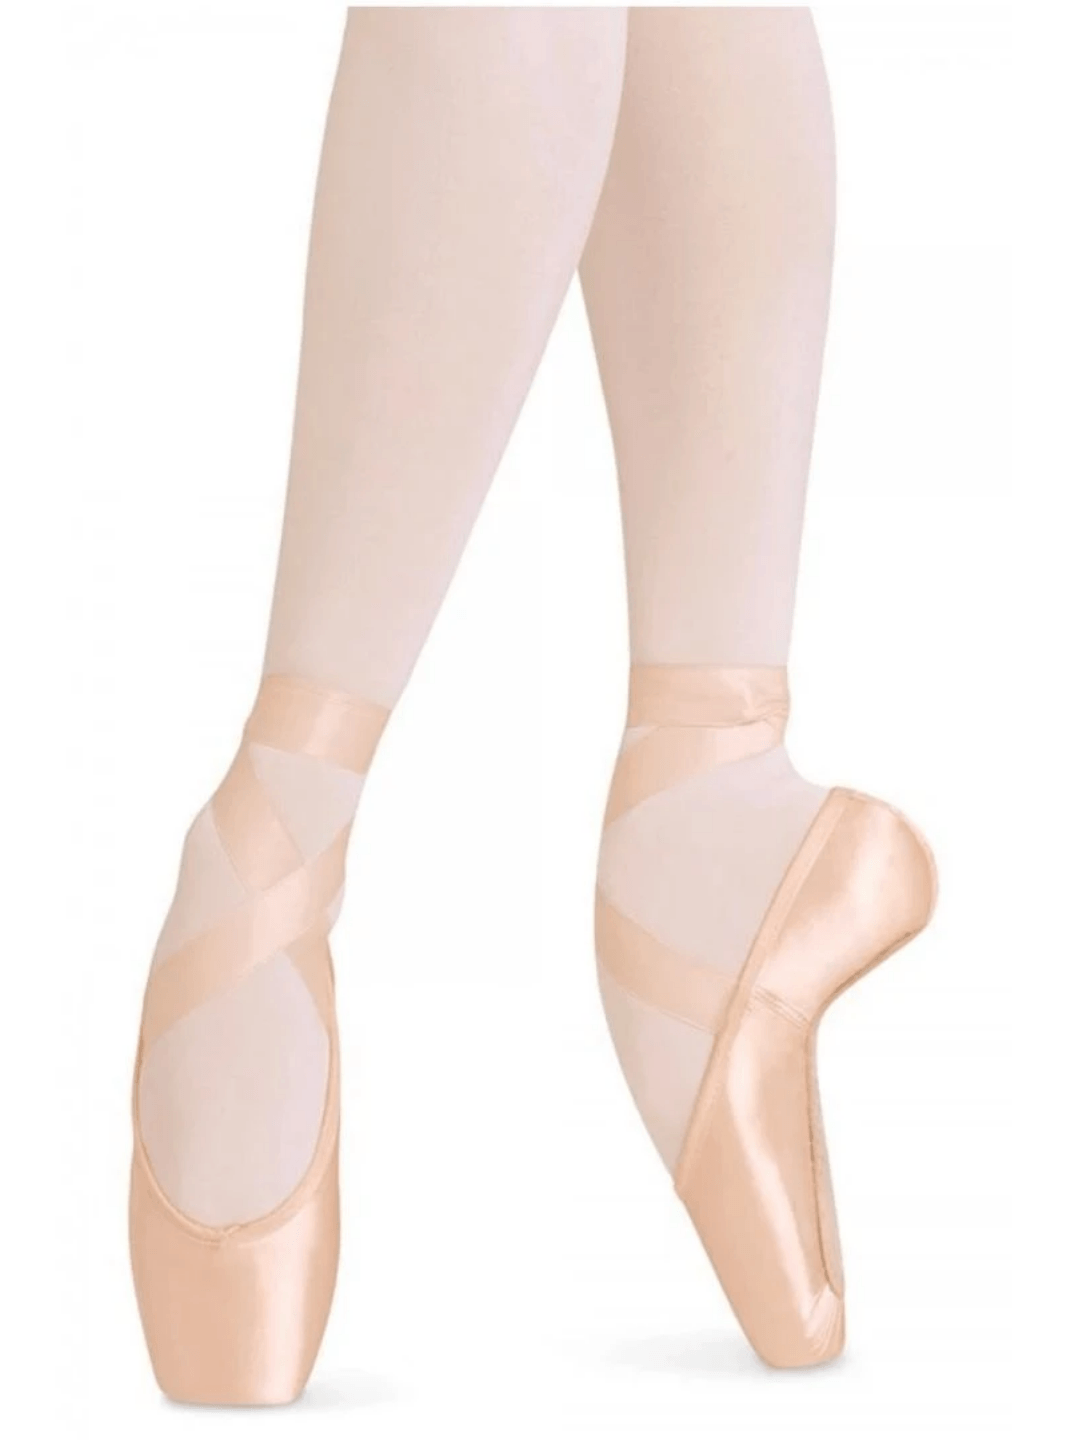 Pointe Shoe Ribbon Kit by Body Wrappers : 50 Body Wrapper , On